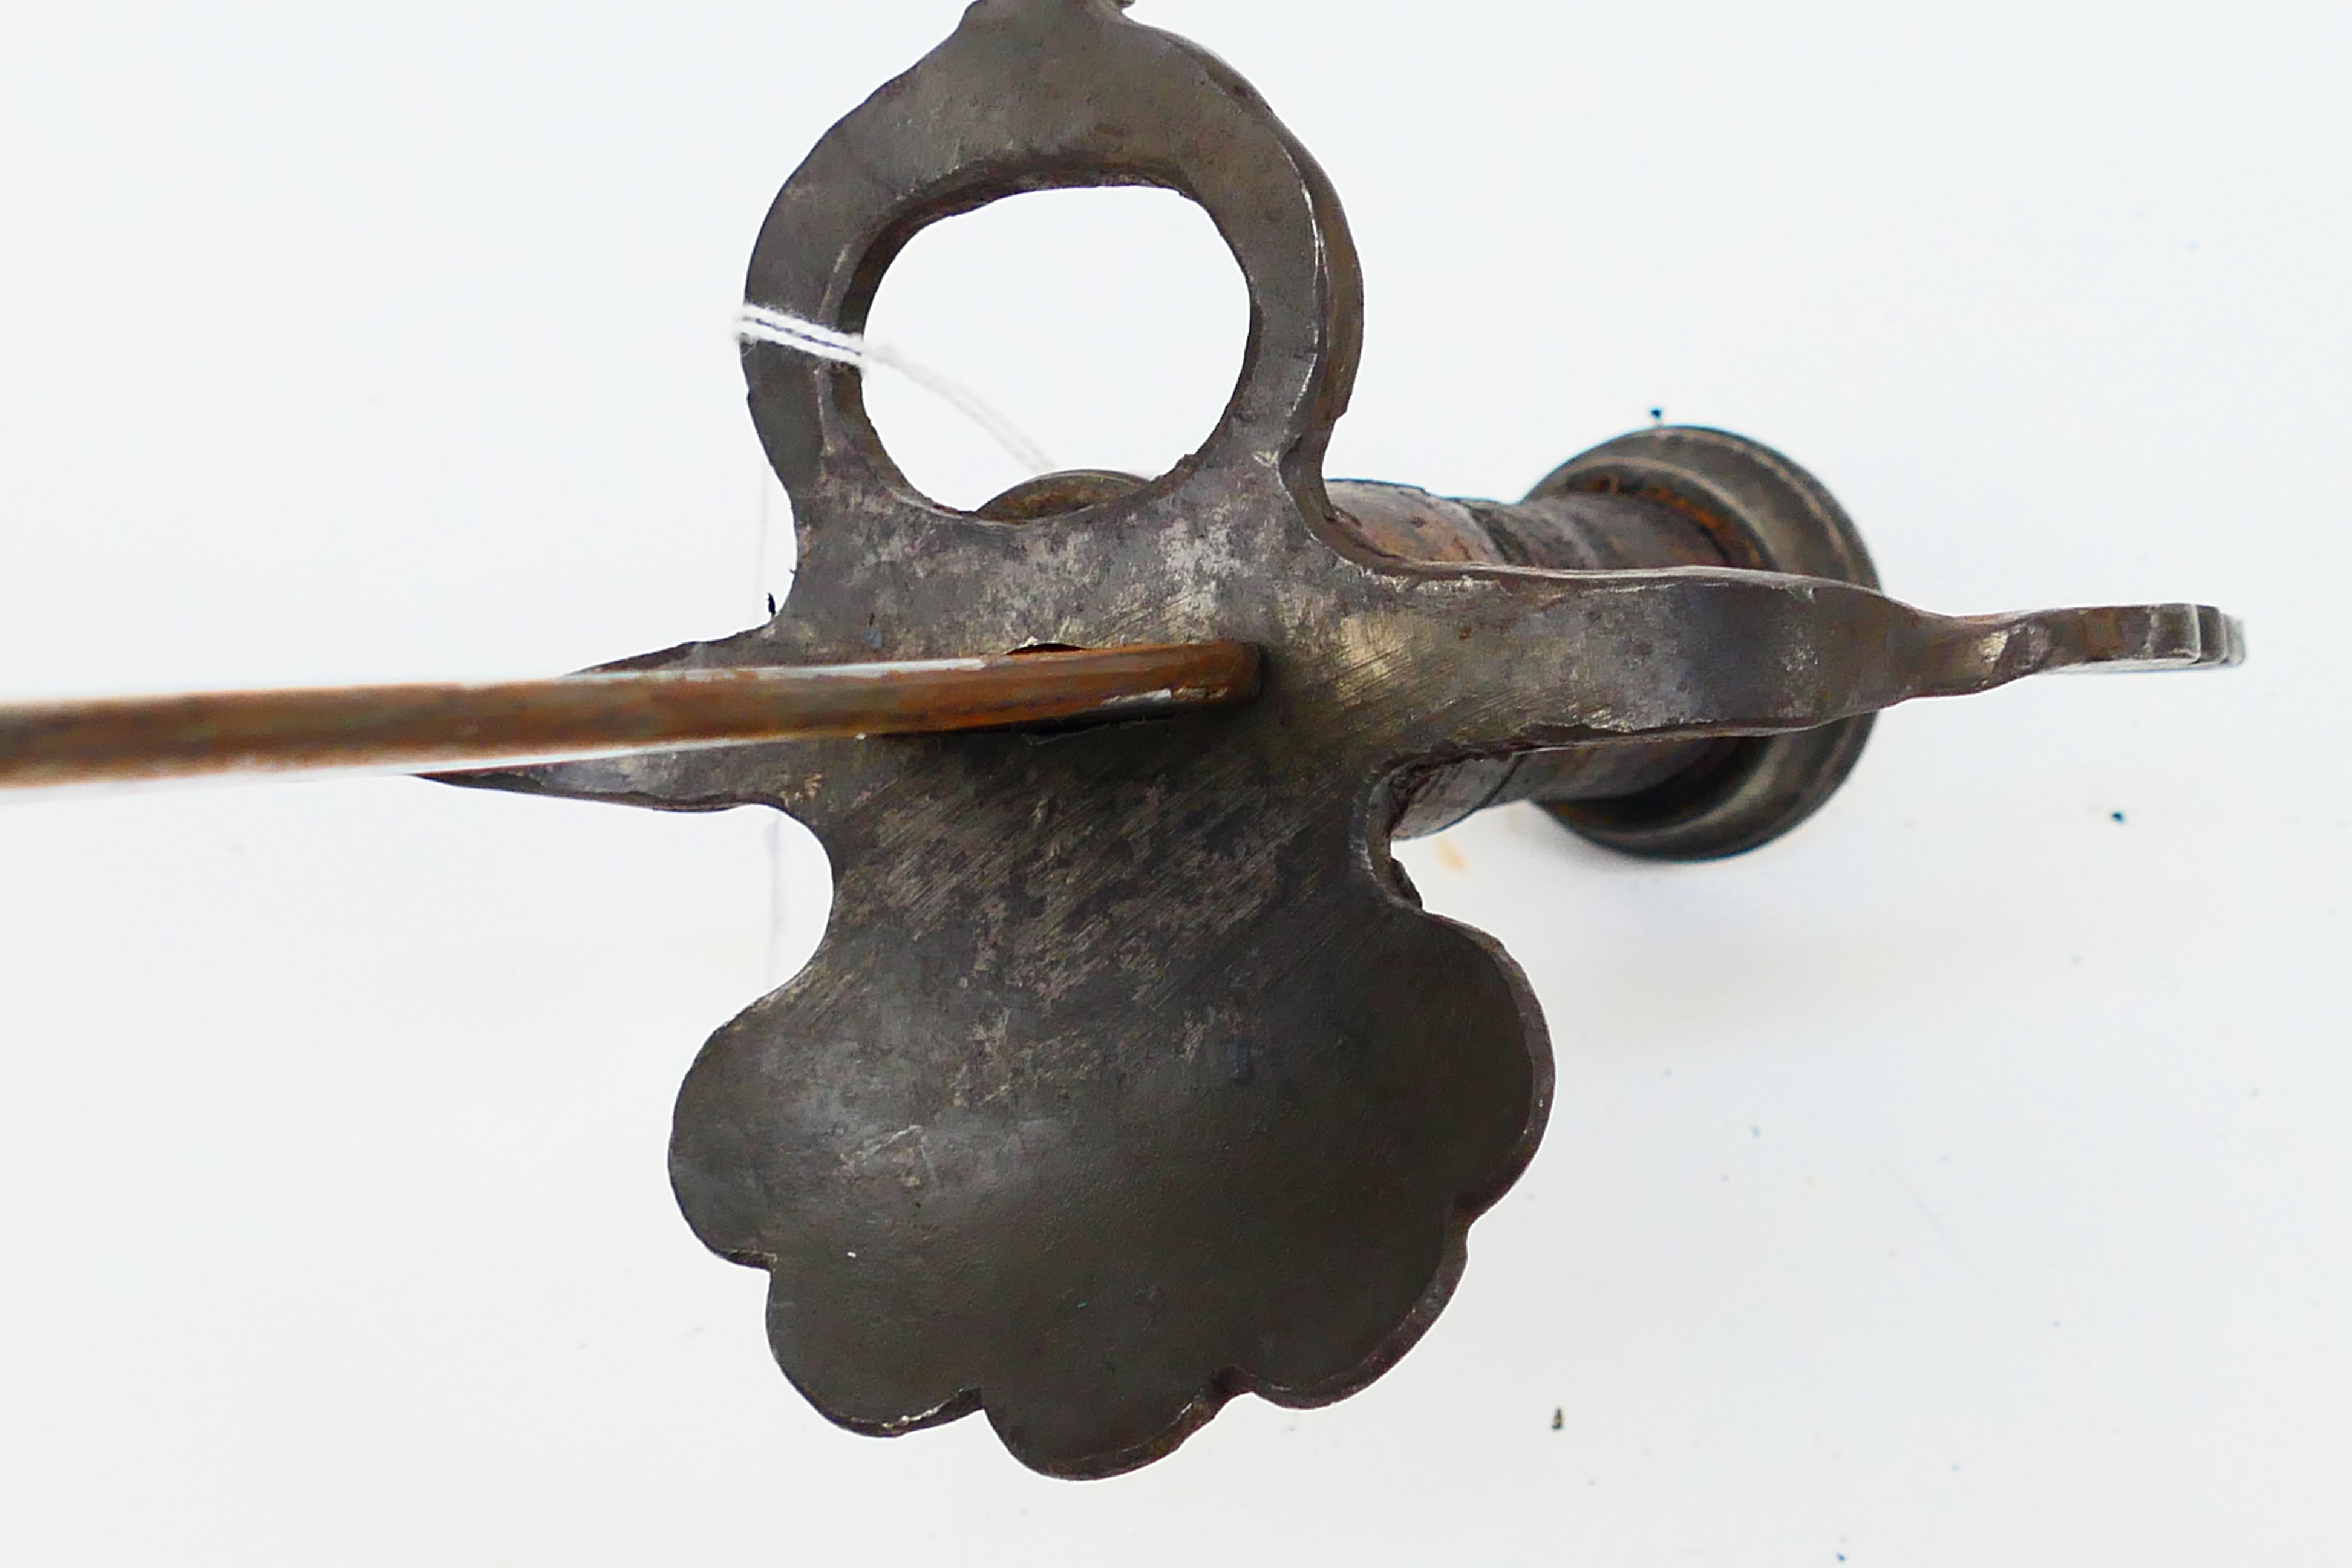 An antique hunting short sword, probably 18th century, iron shell guard, 62 cm (l) blade. - Image 7 of 7